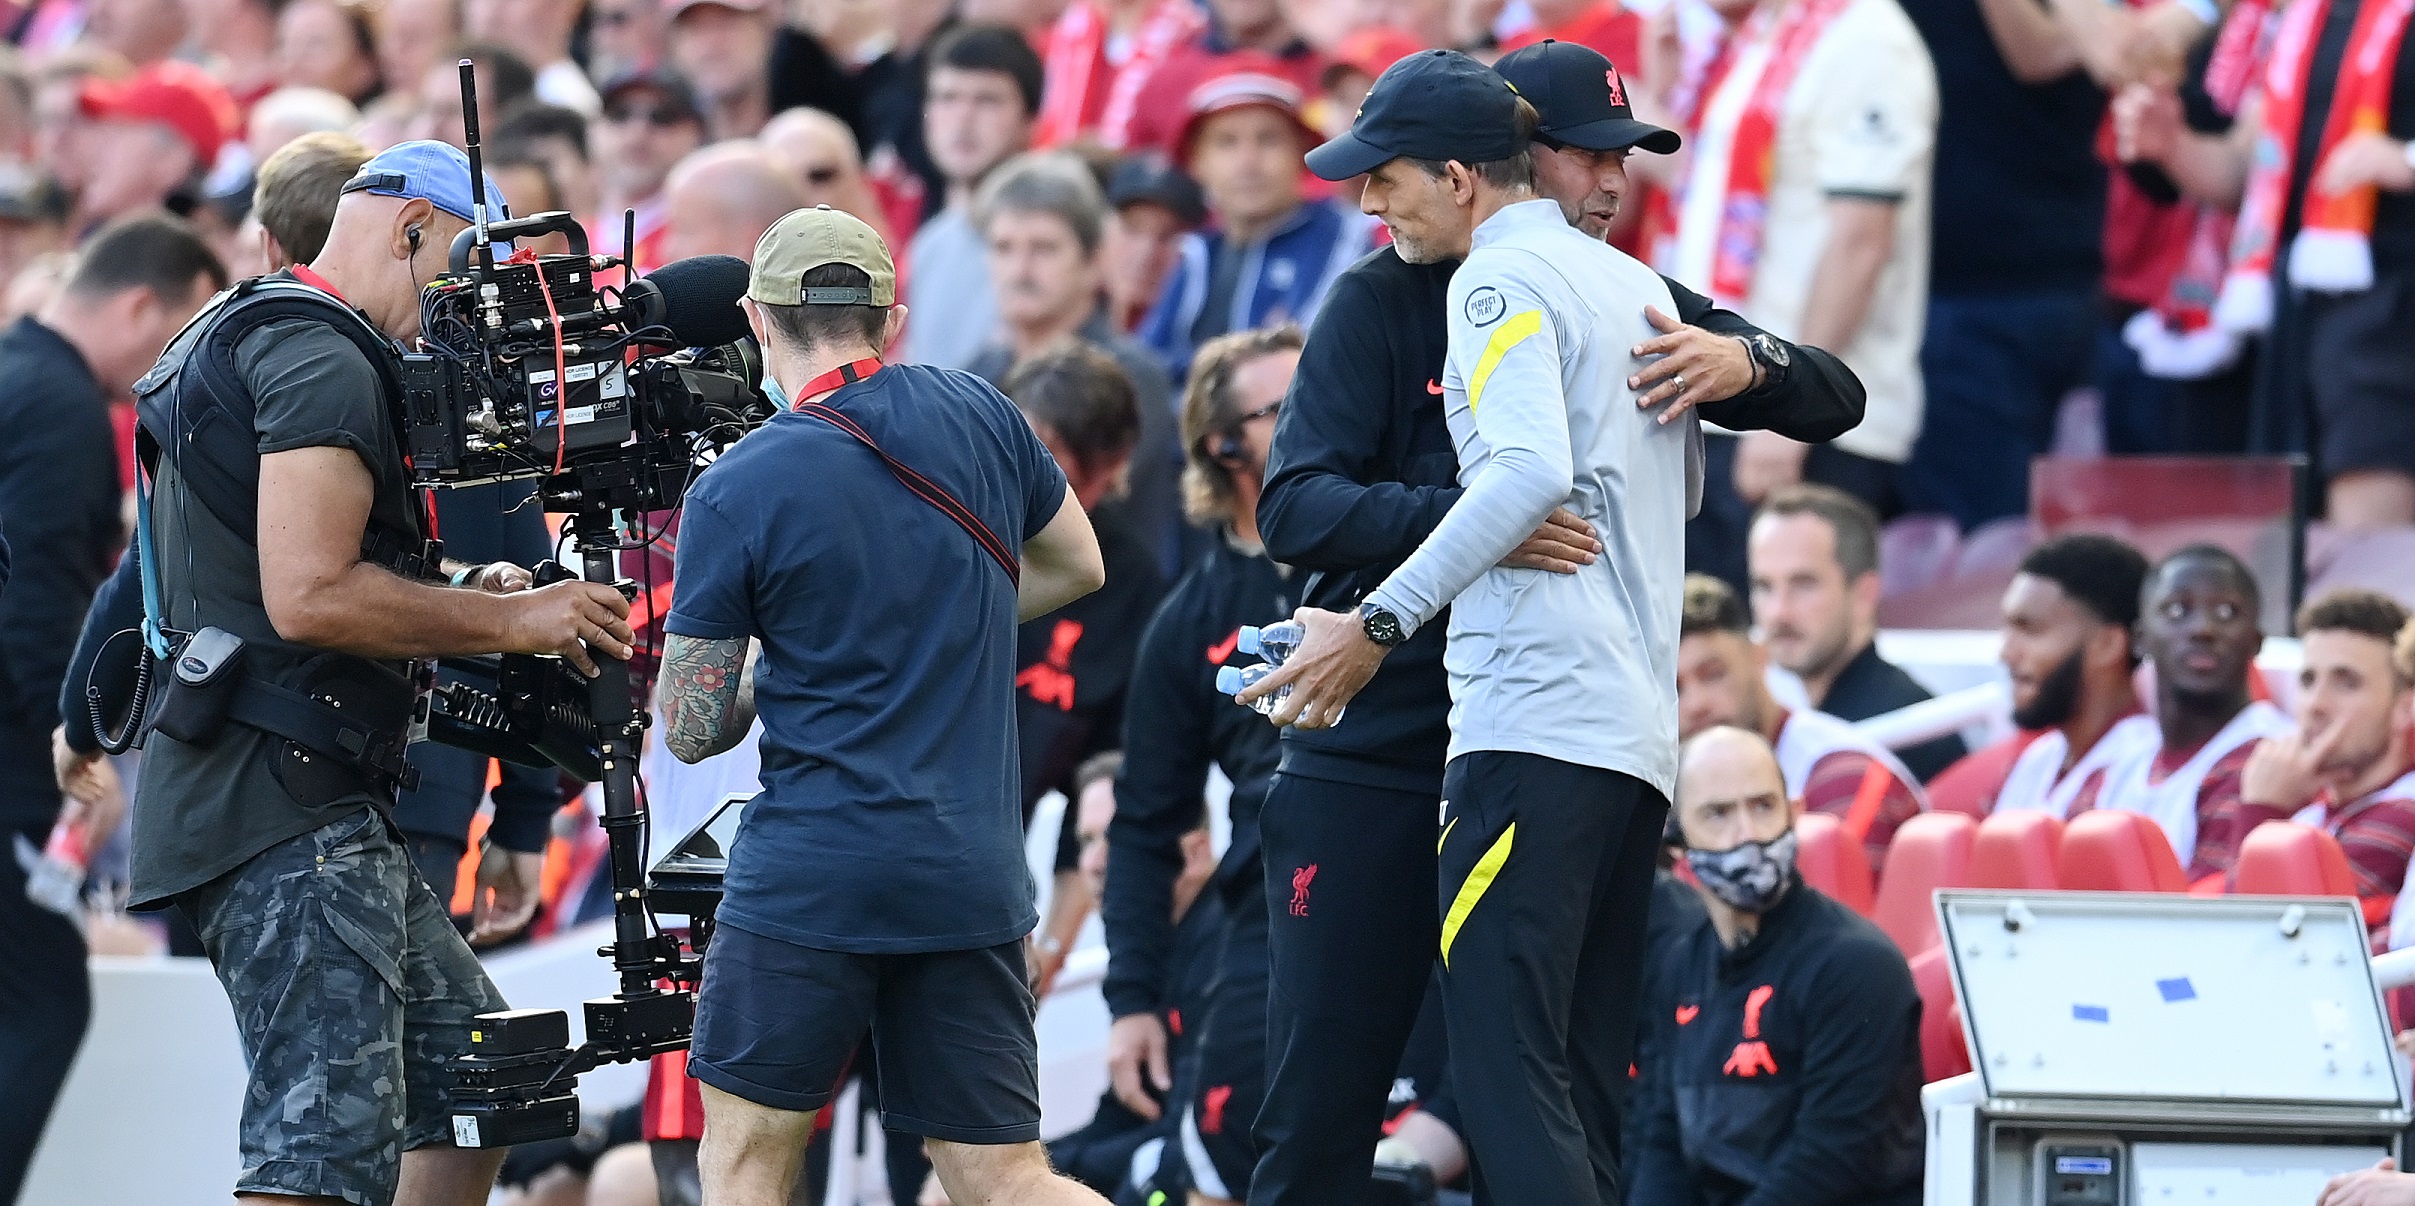 Tuchel’s ‘benchmark’ claim suggests pundits ought to change Liverpool opinion